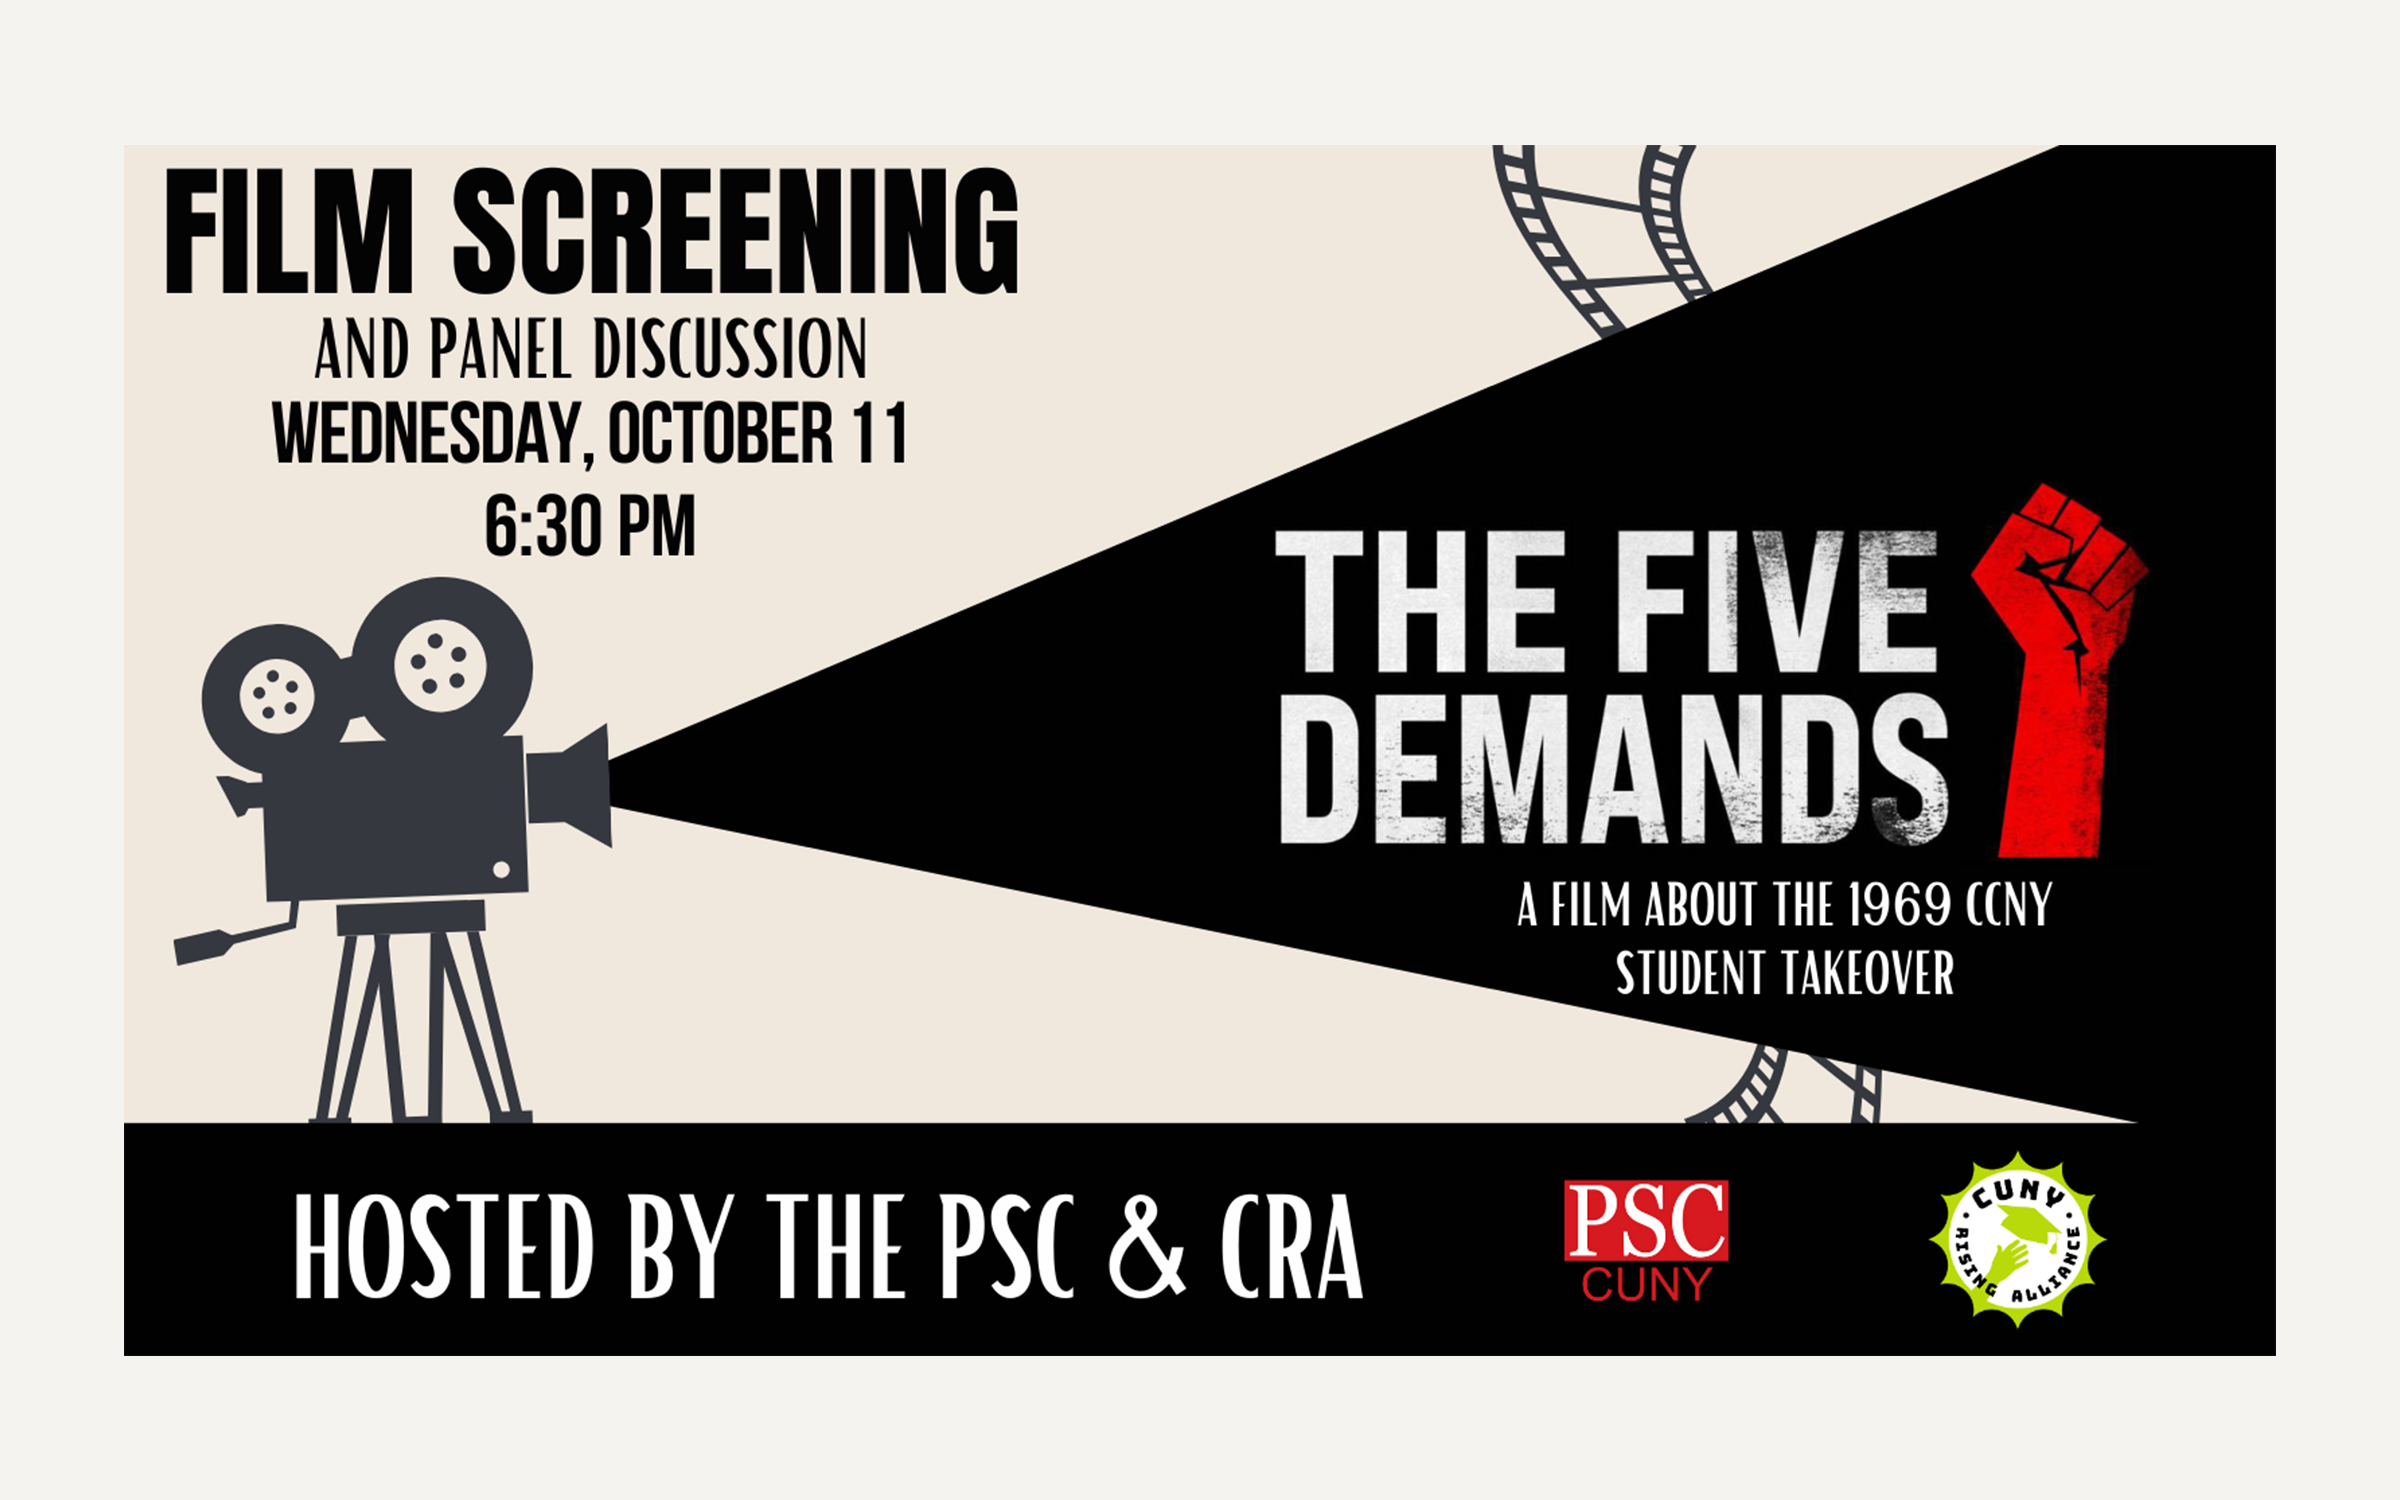 Screening of The Five Demands film held at the PSC on October 11